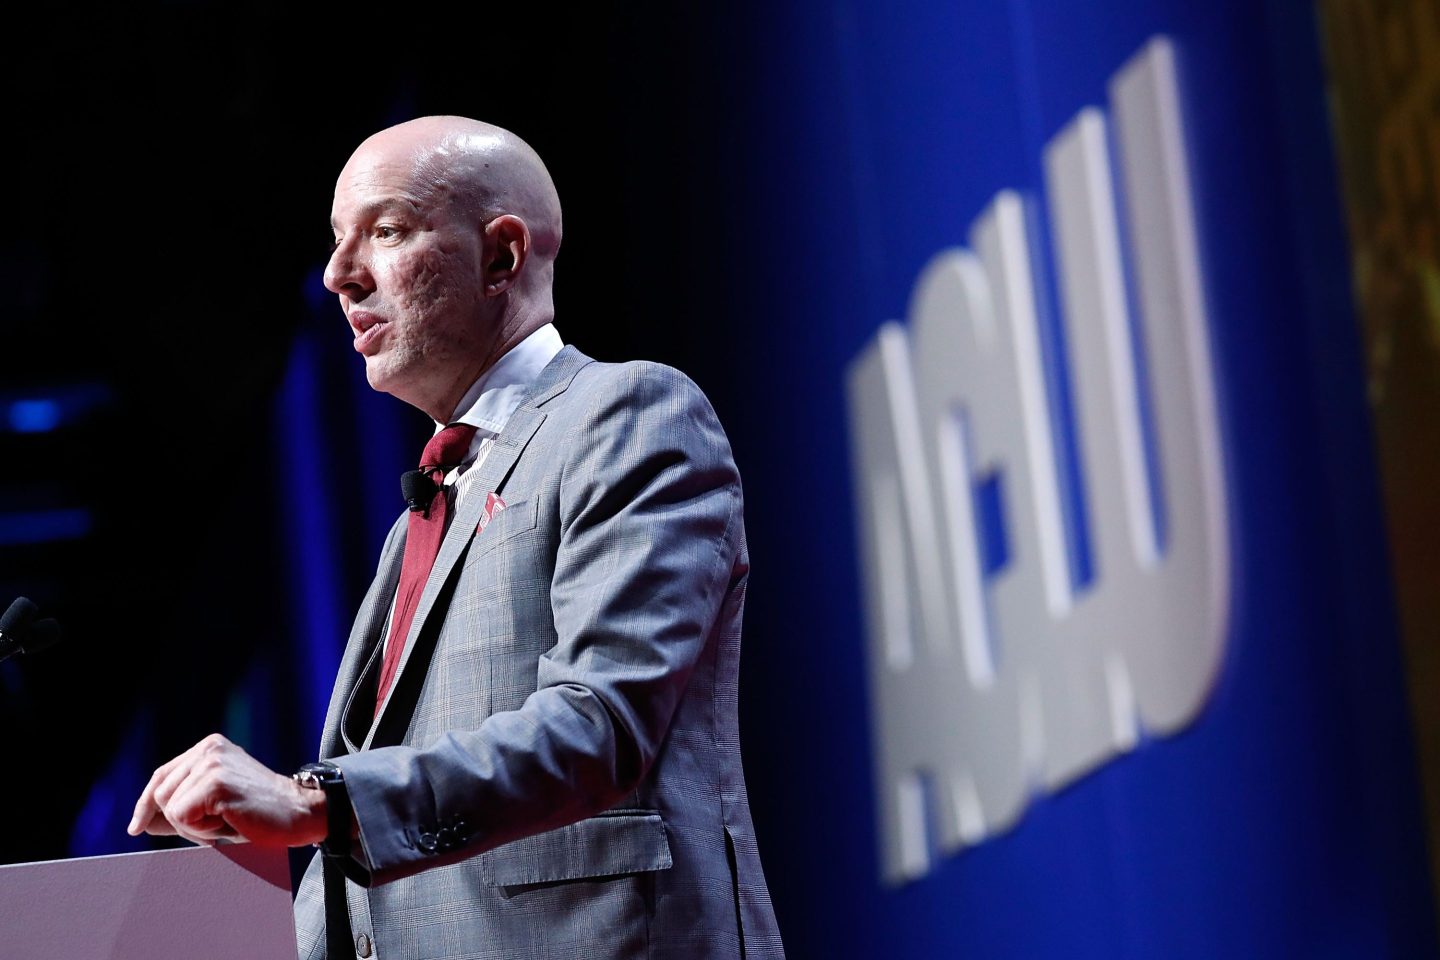 WASHINGTON, DC &#8211; JUNE 11:  ACLU&#8217;s Anthony D. Romero speaks at the 2018 ACLU National Conference at the Washington Convention Center on June 11, 2018 in Washington, DC.  (Photo by Paul Morigi/Getty Images)